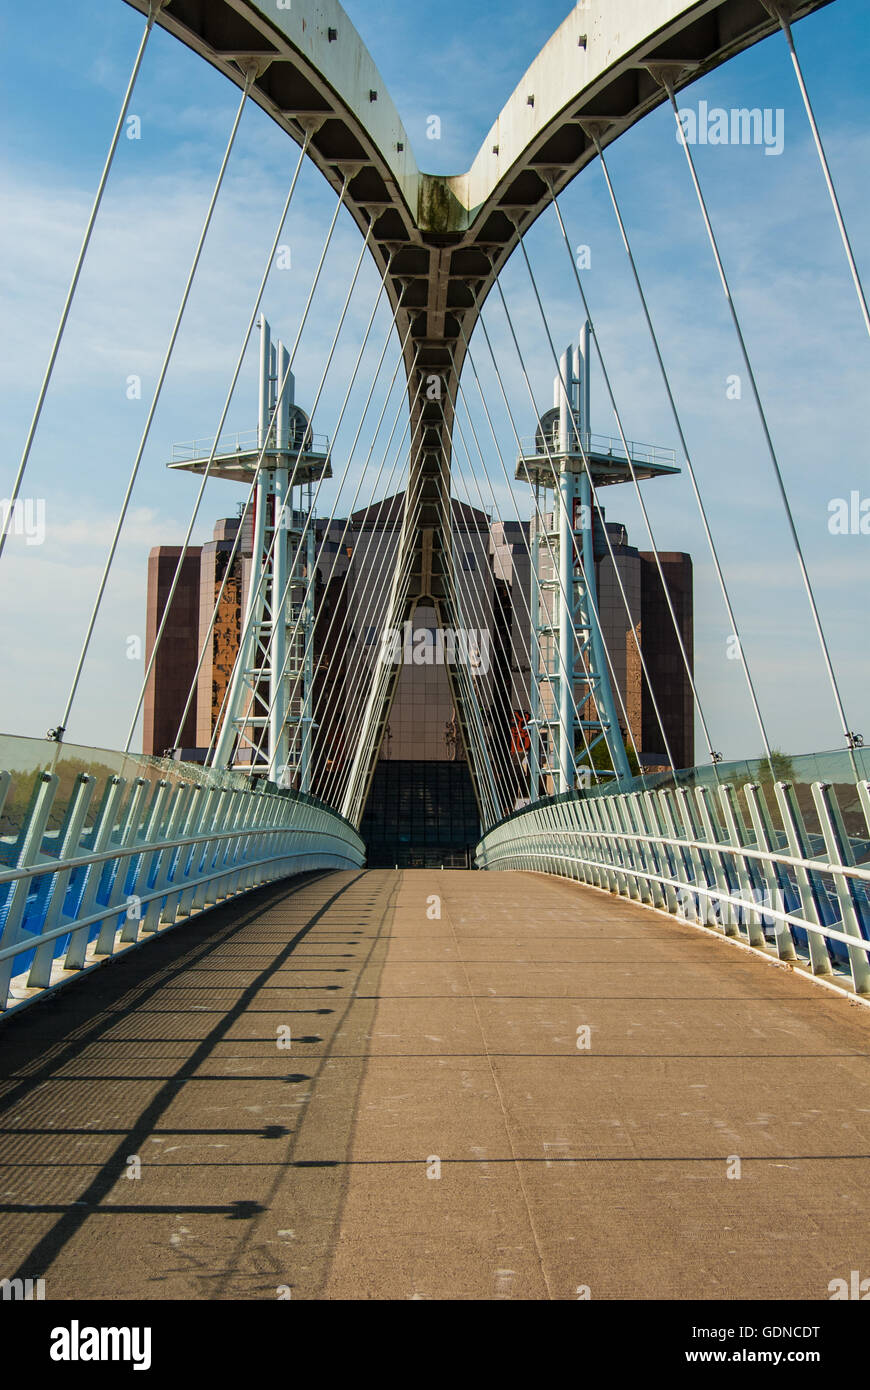 Salford Quays - Footbridge leading from The Lowry, arts centre towards Quay West on the Waterfront. Stock Photo